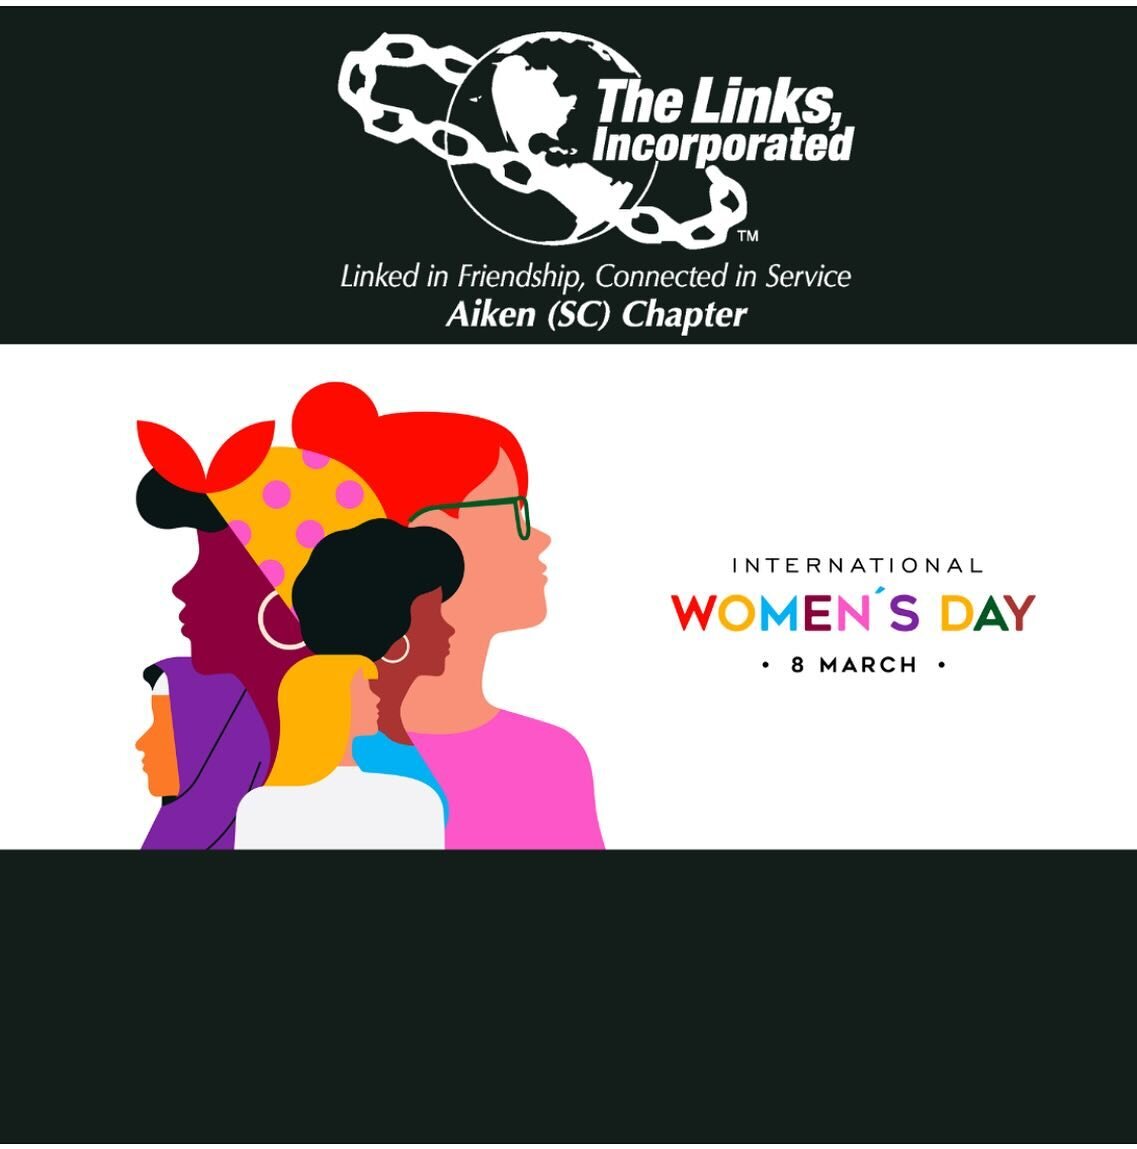 The Aiken (SC) Chapter of The Links, Incorporated celebrates International Women&rsquo;s Day and the achievement of the members of our chapter and women across the world.